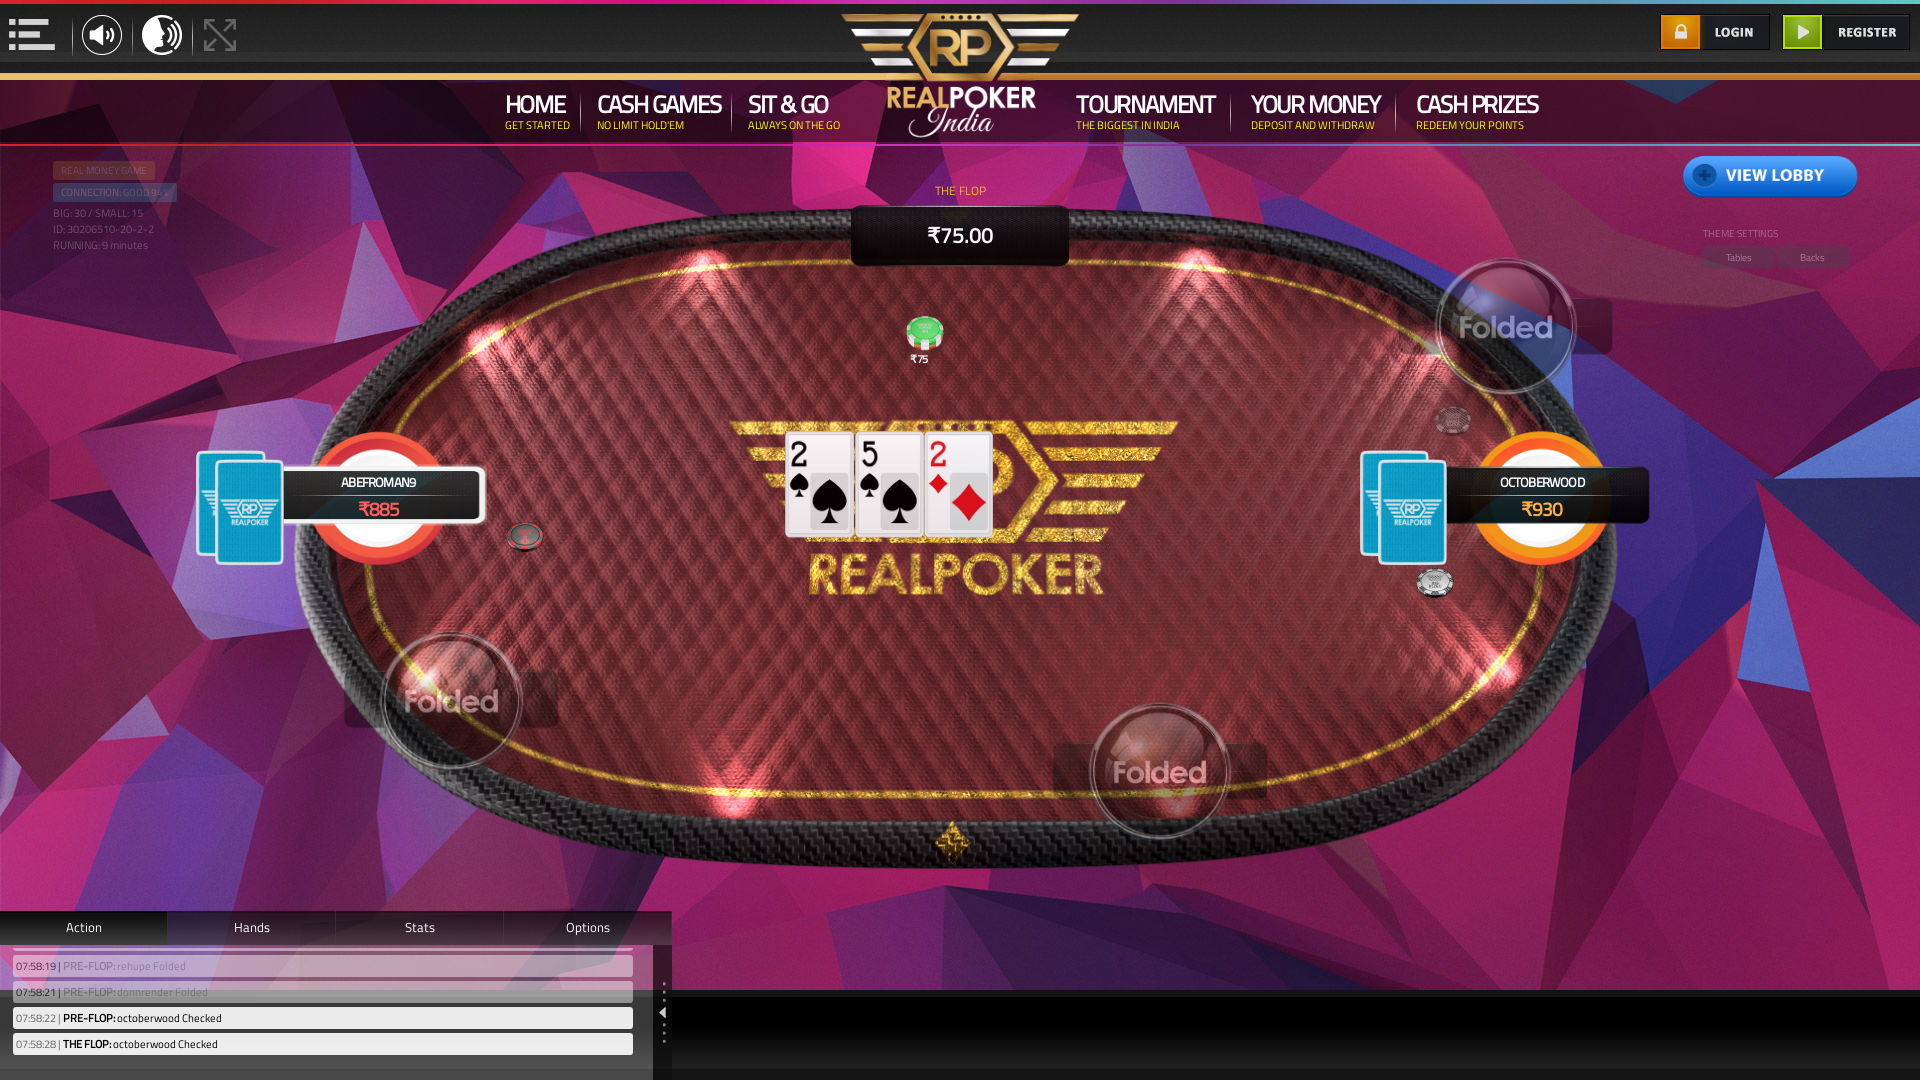 Quepem Goa 10 player poker in the 9th minute